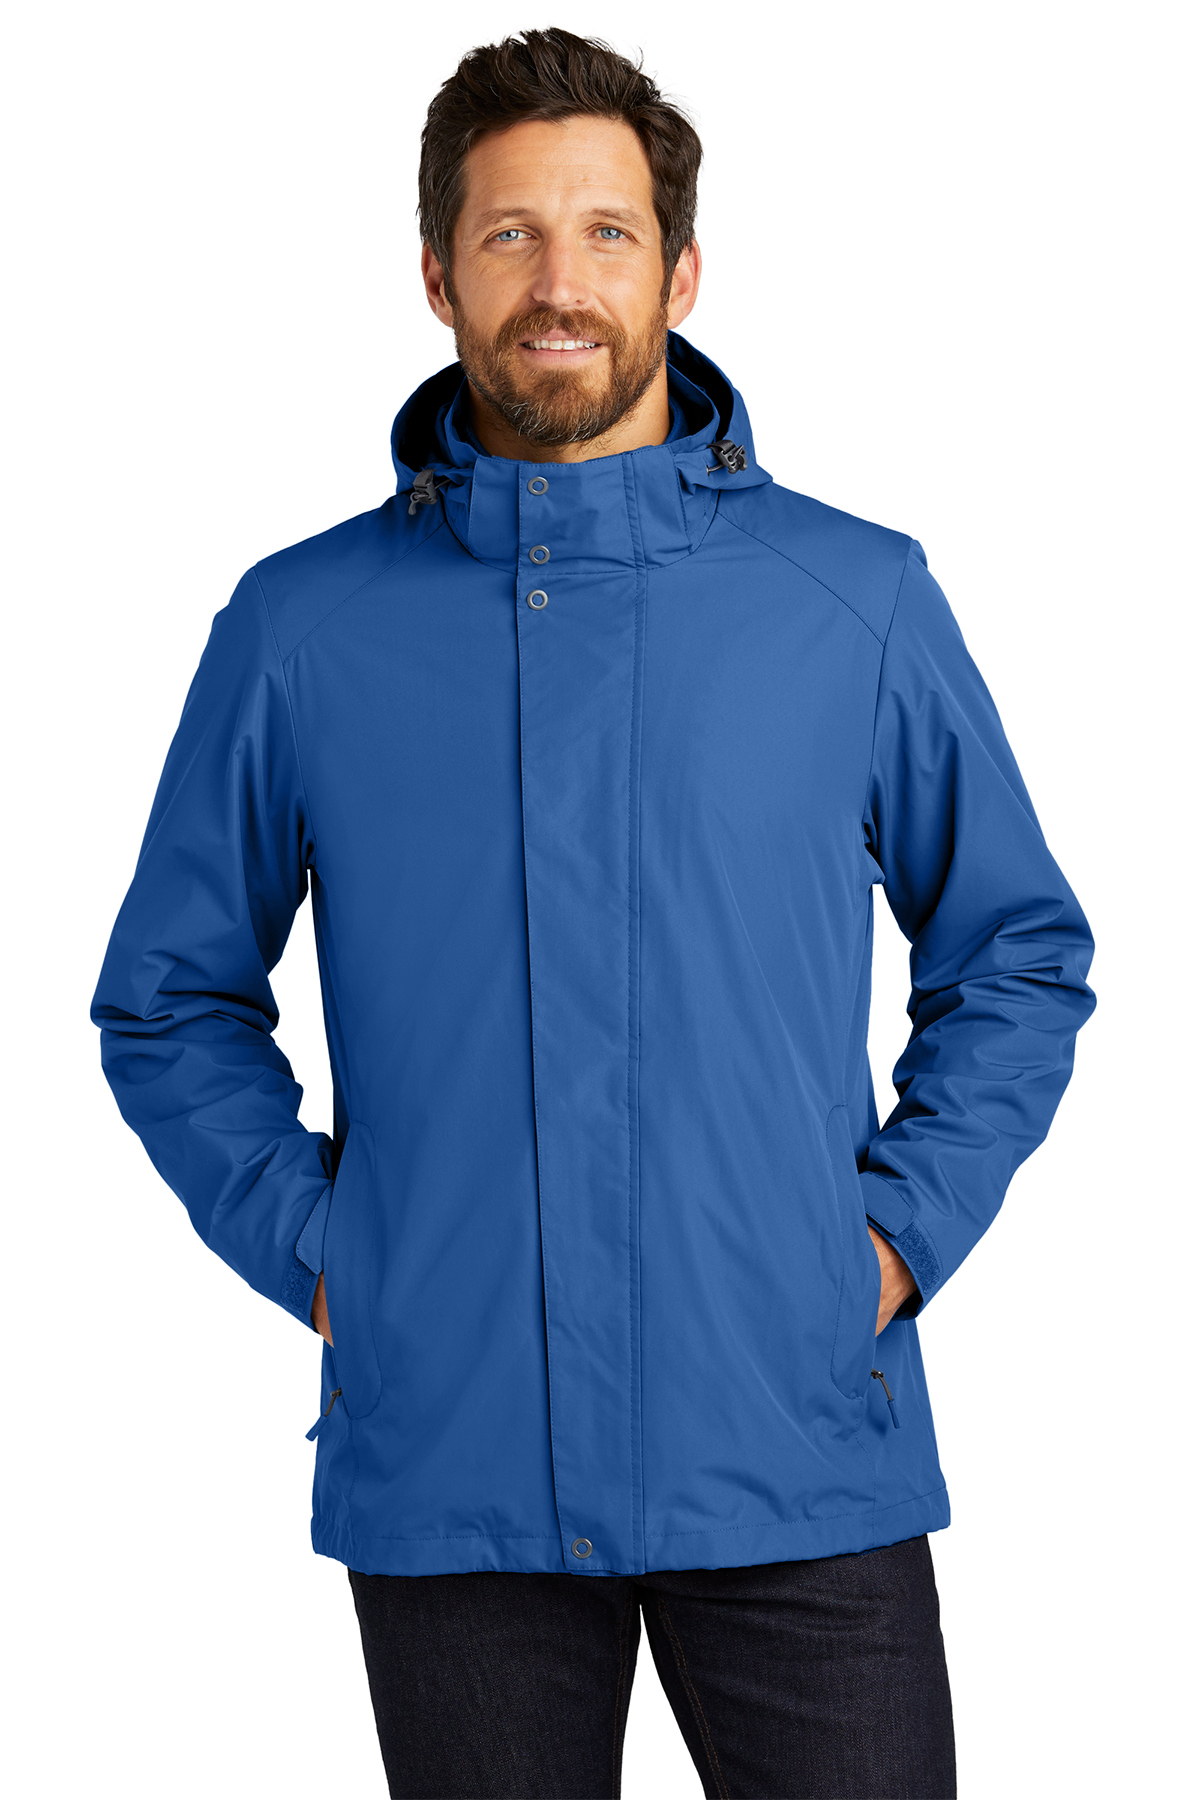 Men's Insulated Fishing Jacket with Removable Hood and Inner Storm